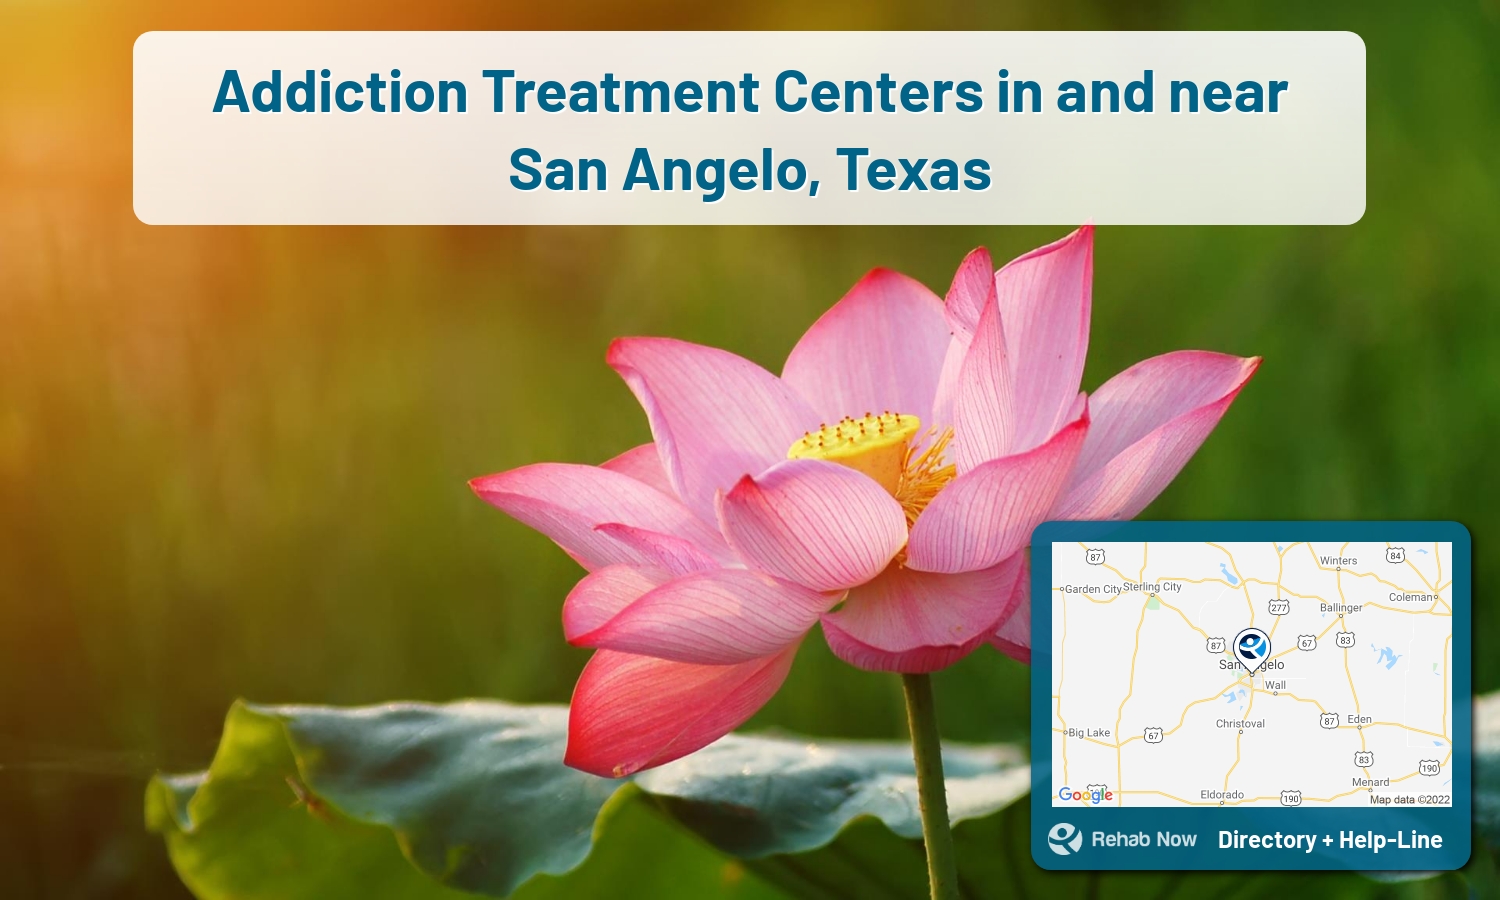 Our experts can help you find treatment now in San Angelo, Texas. We list drug rehab and alcohol centers in Texas.